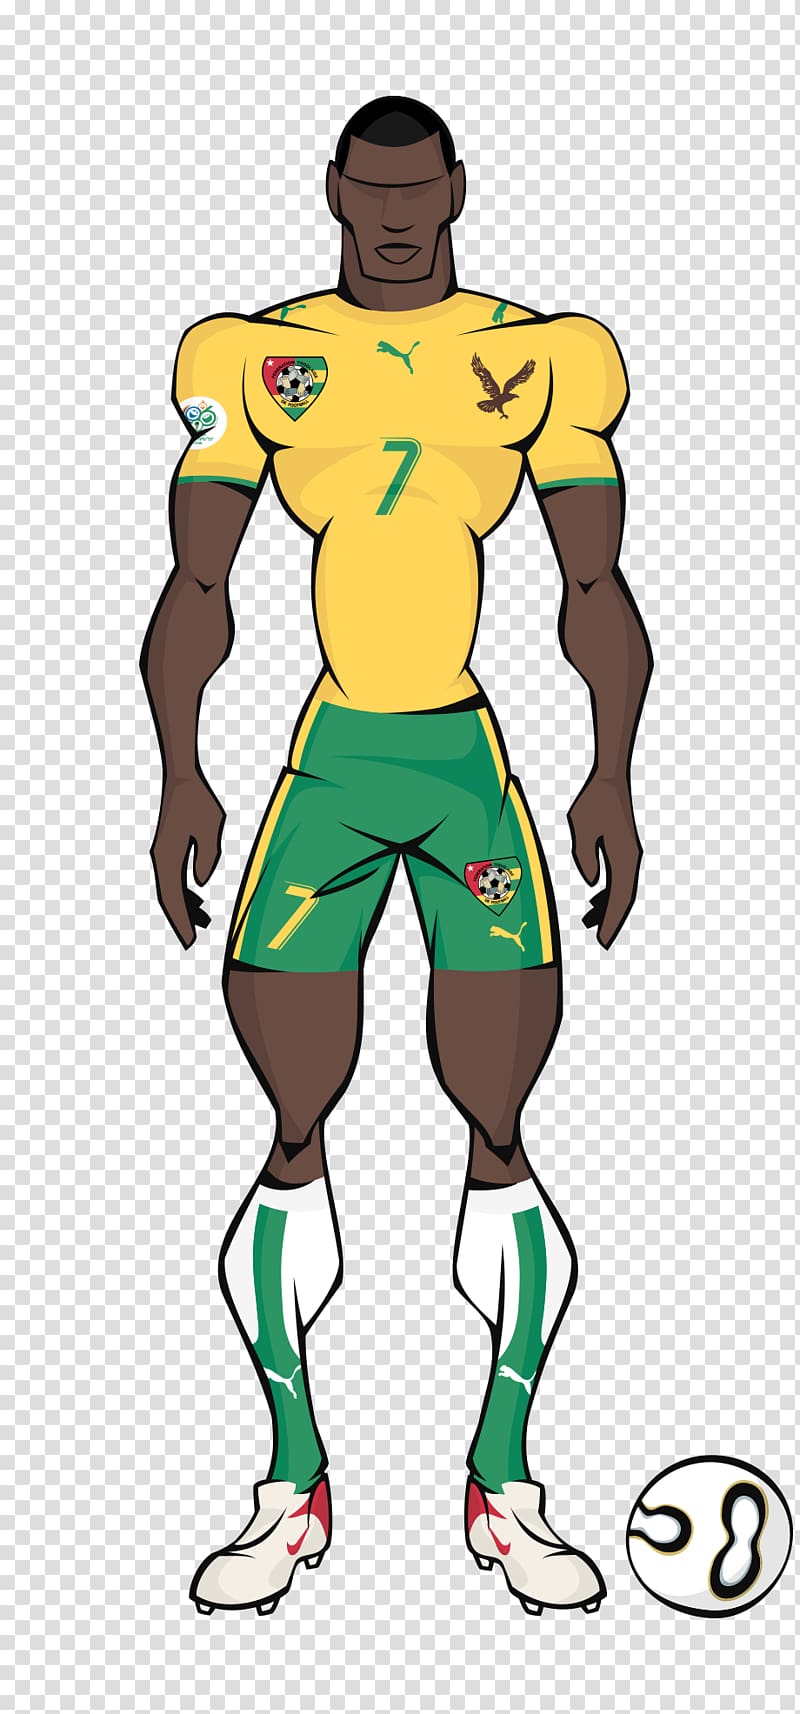 South Africa 2010 FIFA World Cup Cameroon national football team Jacques Songo\'o Claude Le Roy, oliver kahn transparent background PNG clipart